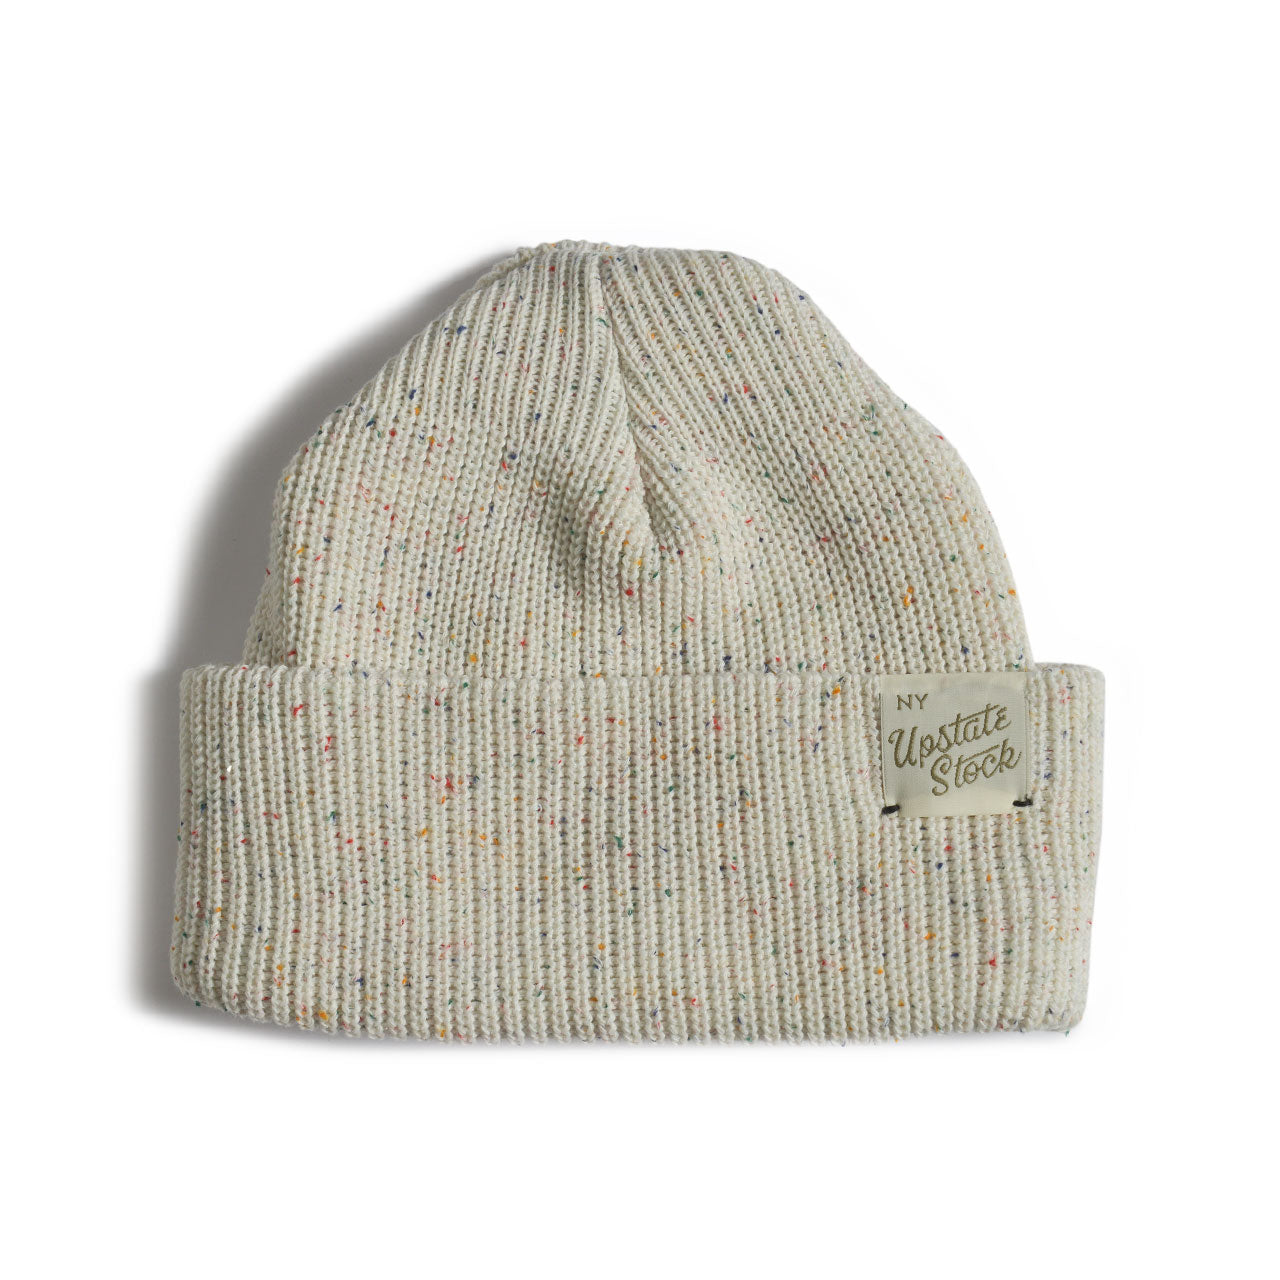 Upstate Stock Confetti Recycled Cotton Watchcap